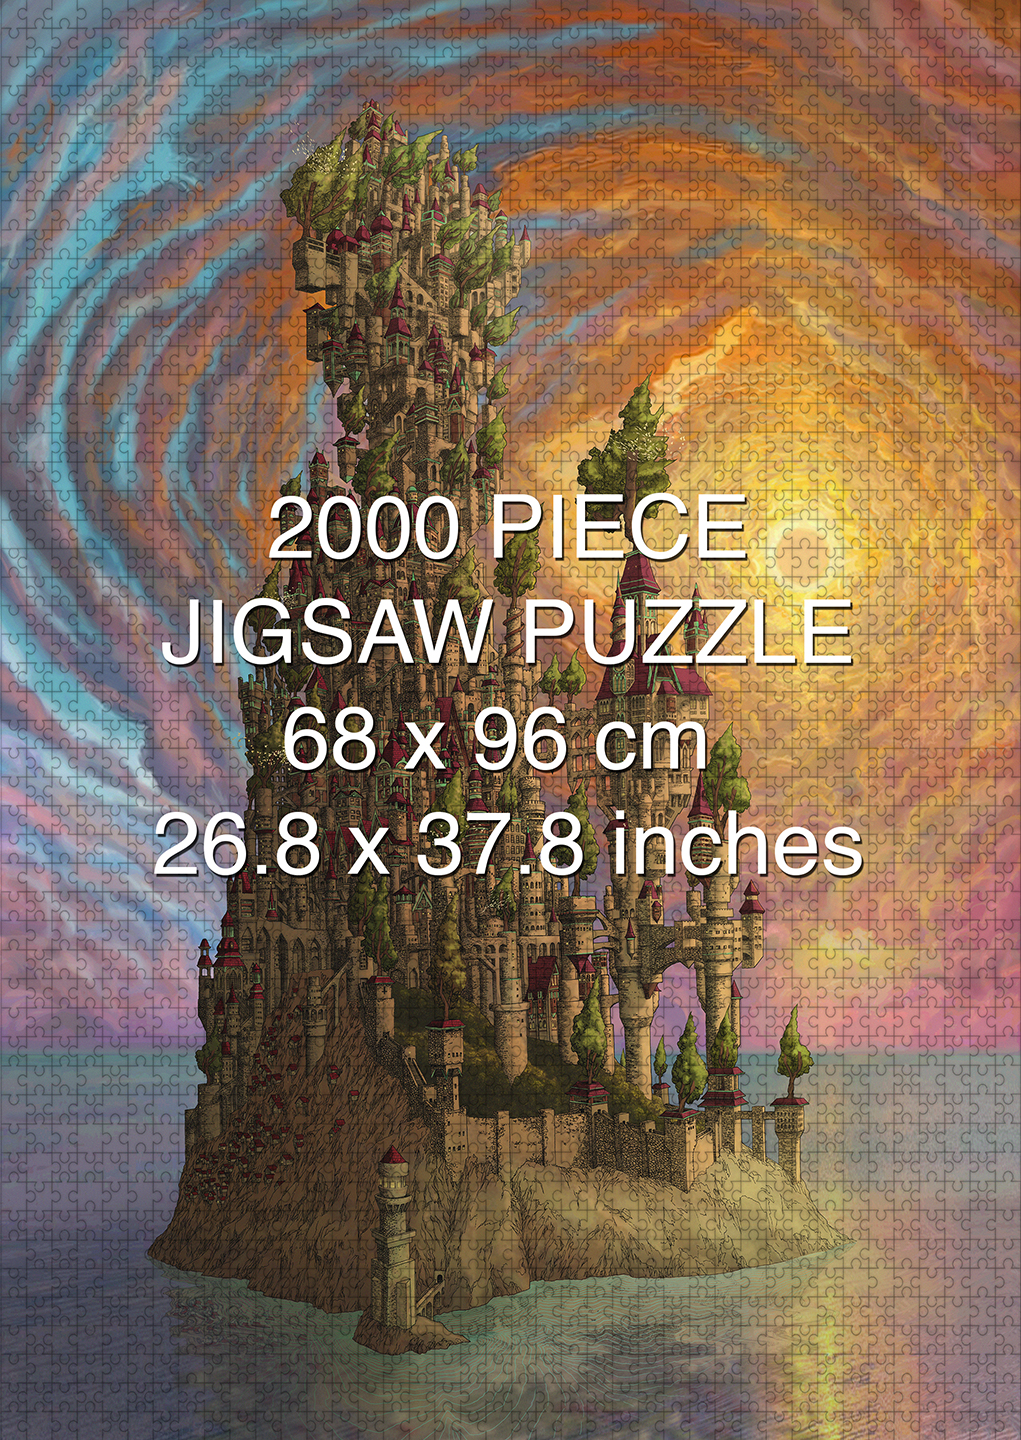 A Delicate Balance: The KA Delicate Balance: The Kingdom 2000 piece puzzle by Aaron Wolf and Pandemic Puzzlesingdom 2000 piece puzzle